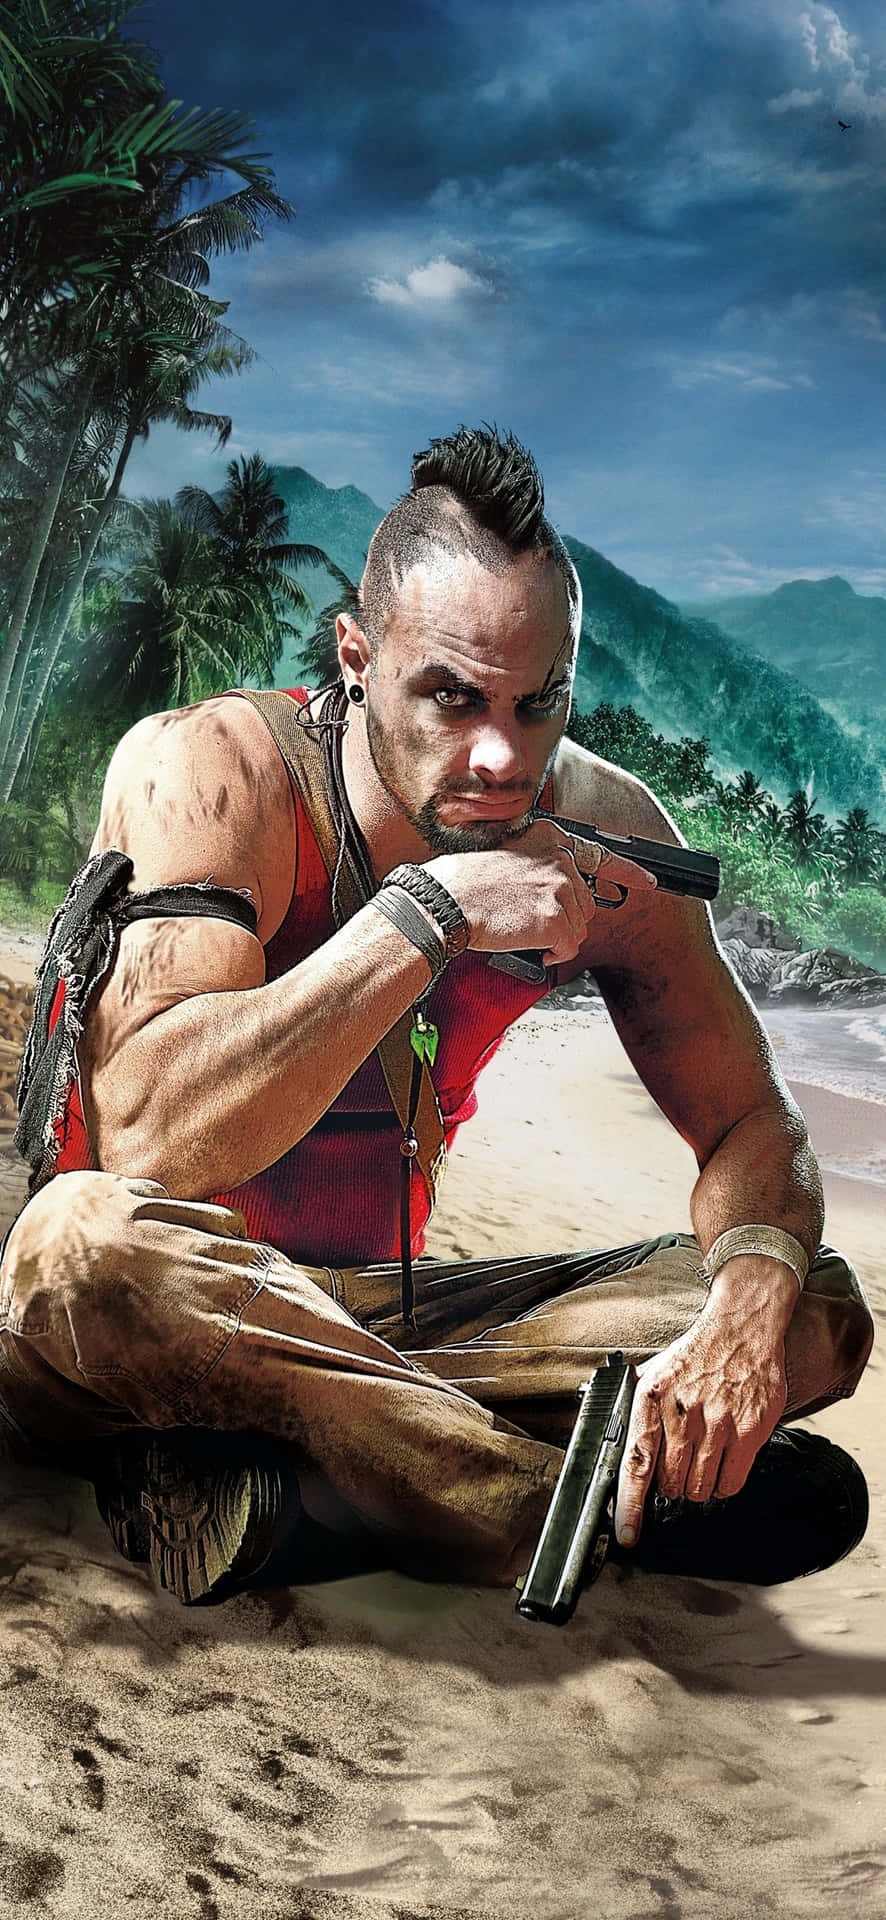 iPhone X Far Cry 3 Vaas Montenegro Sand Background